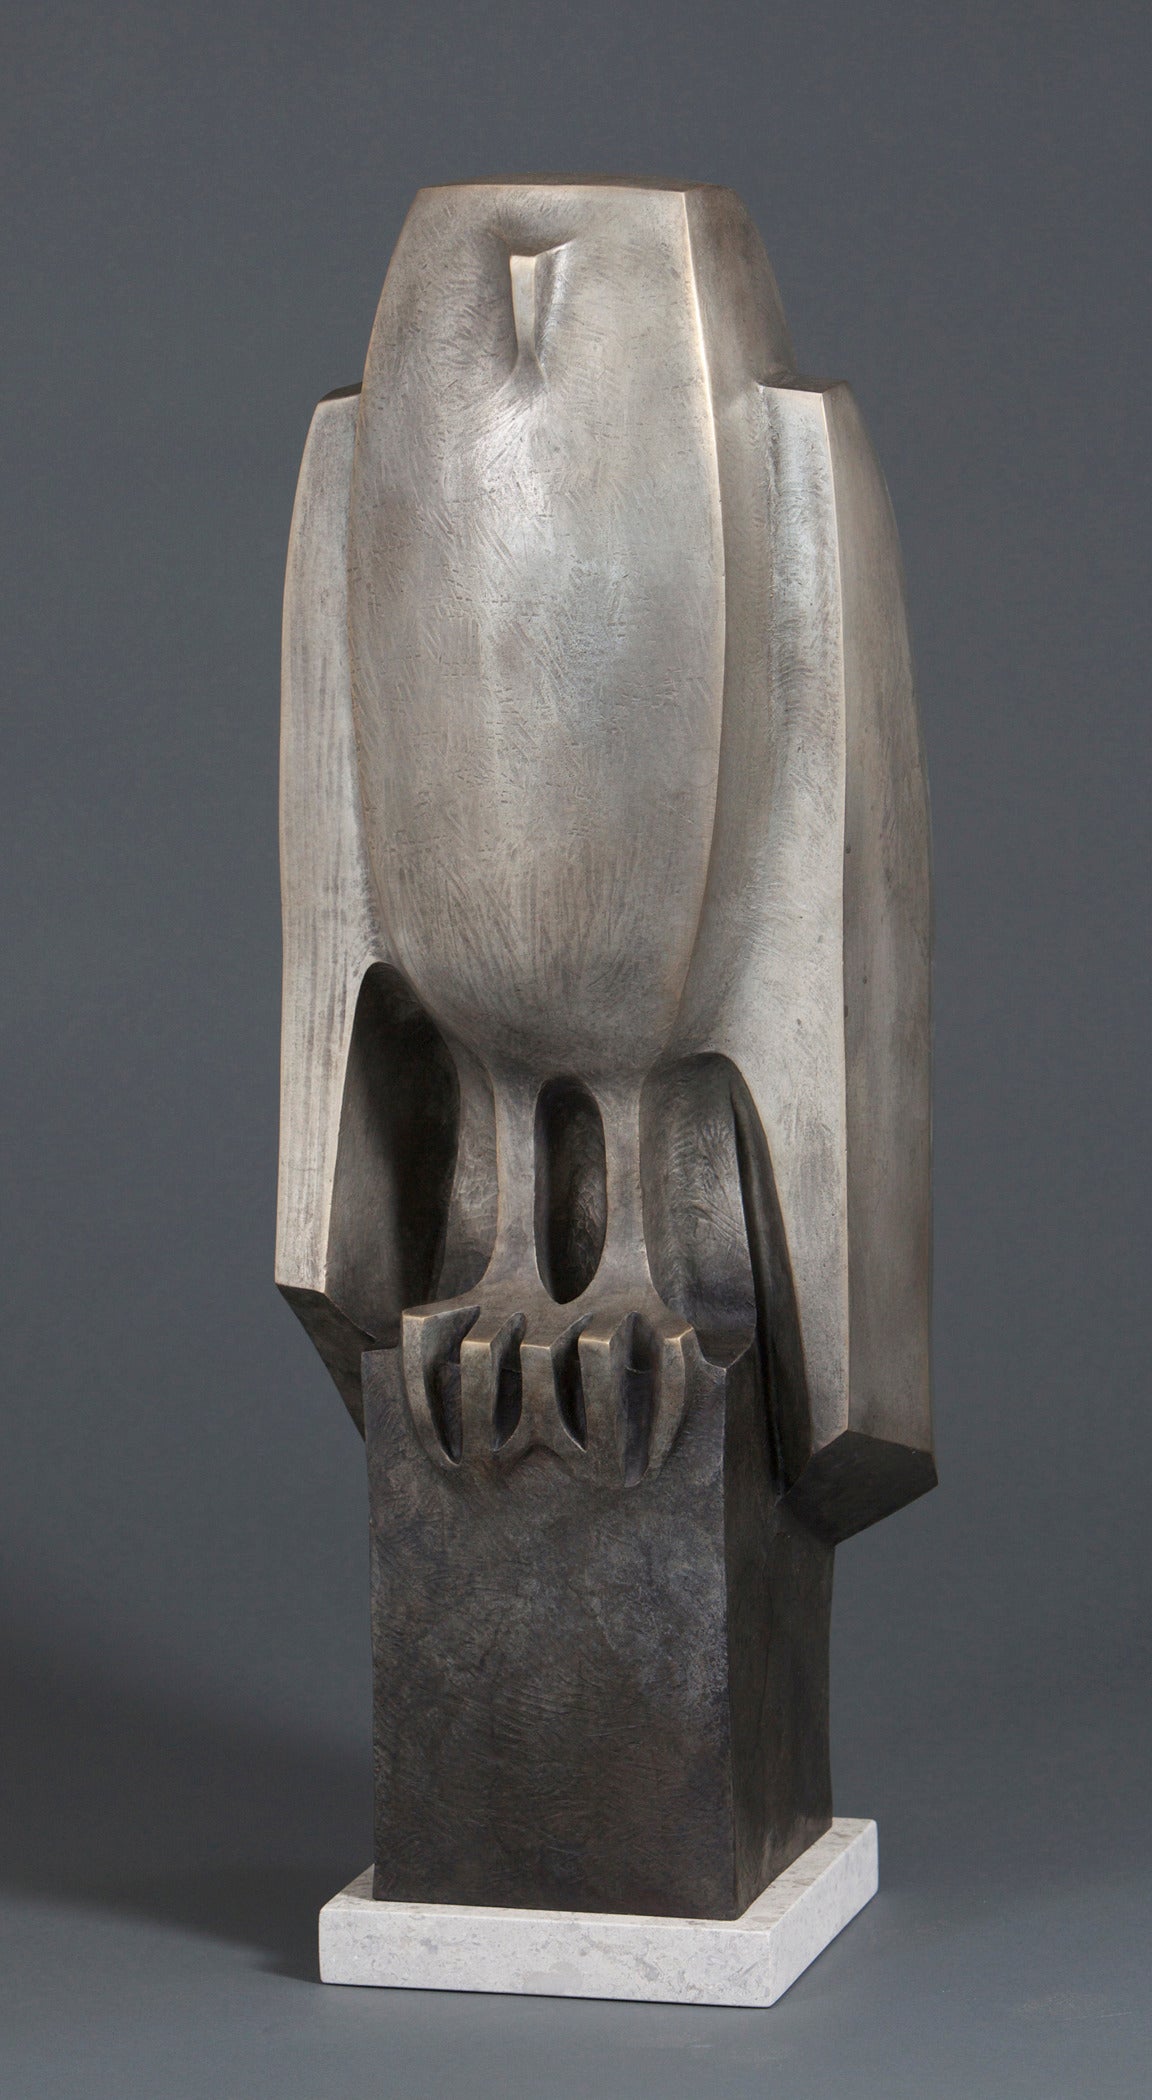 "Whoo 10/12" modern bronze sculpture of an owl with gray patina